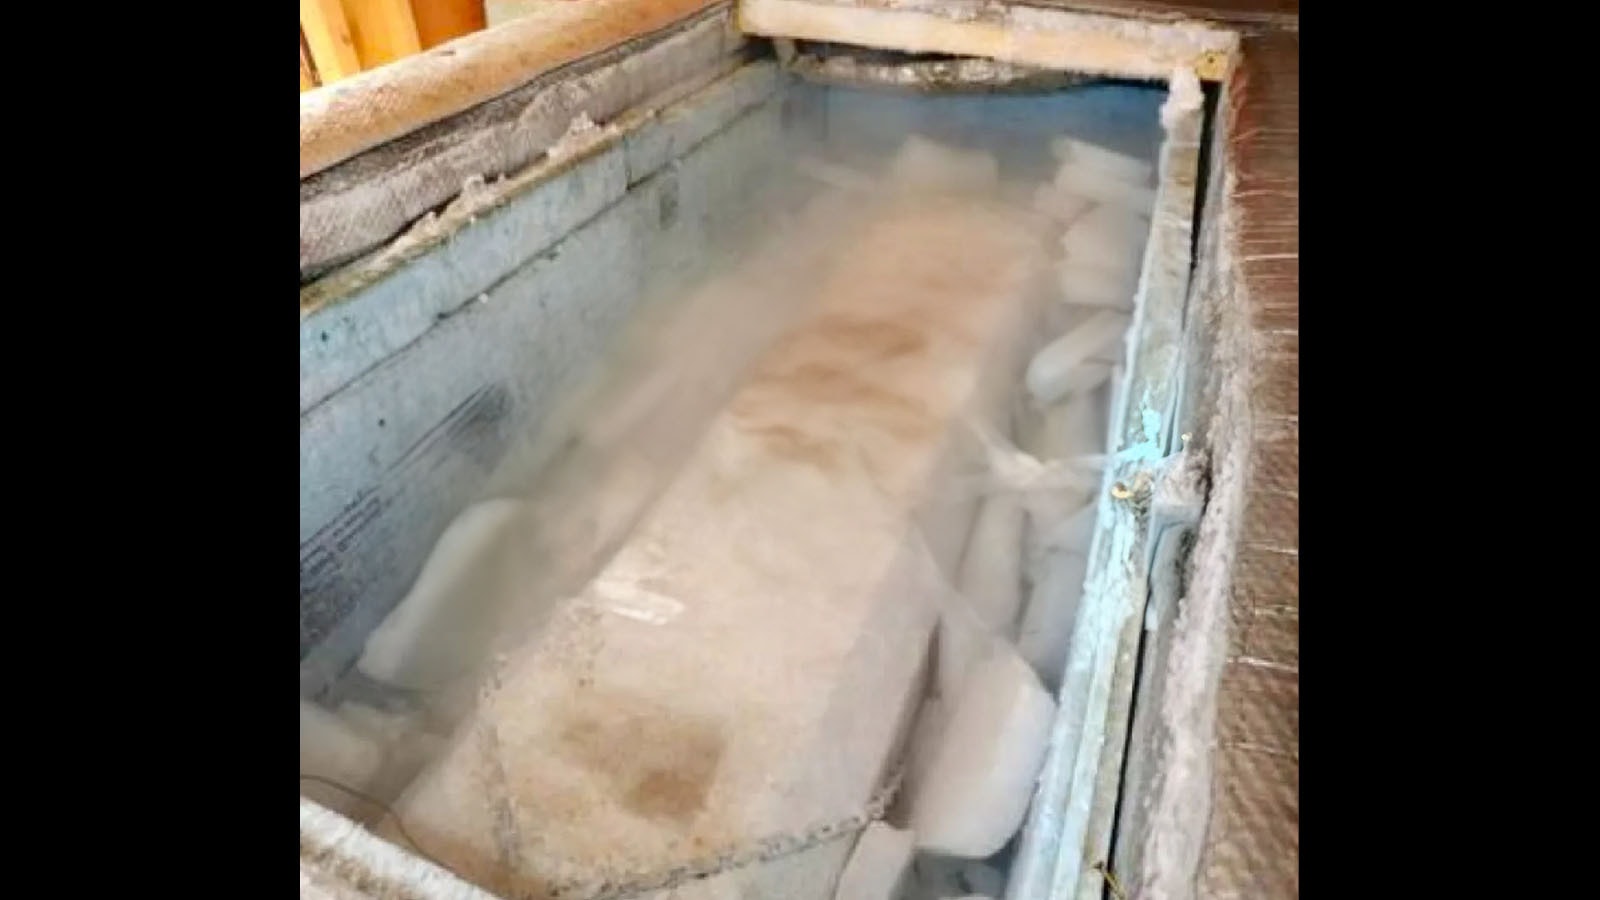 The body of Bredo Morstol, aka the Frozen Dead Guy of Nederland, Colorado, was kept in 1,000 pounds of dry ice in a shed on his grandson's property. Bredo's body was discovered after his grandson was deported.